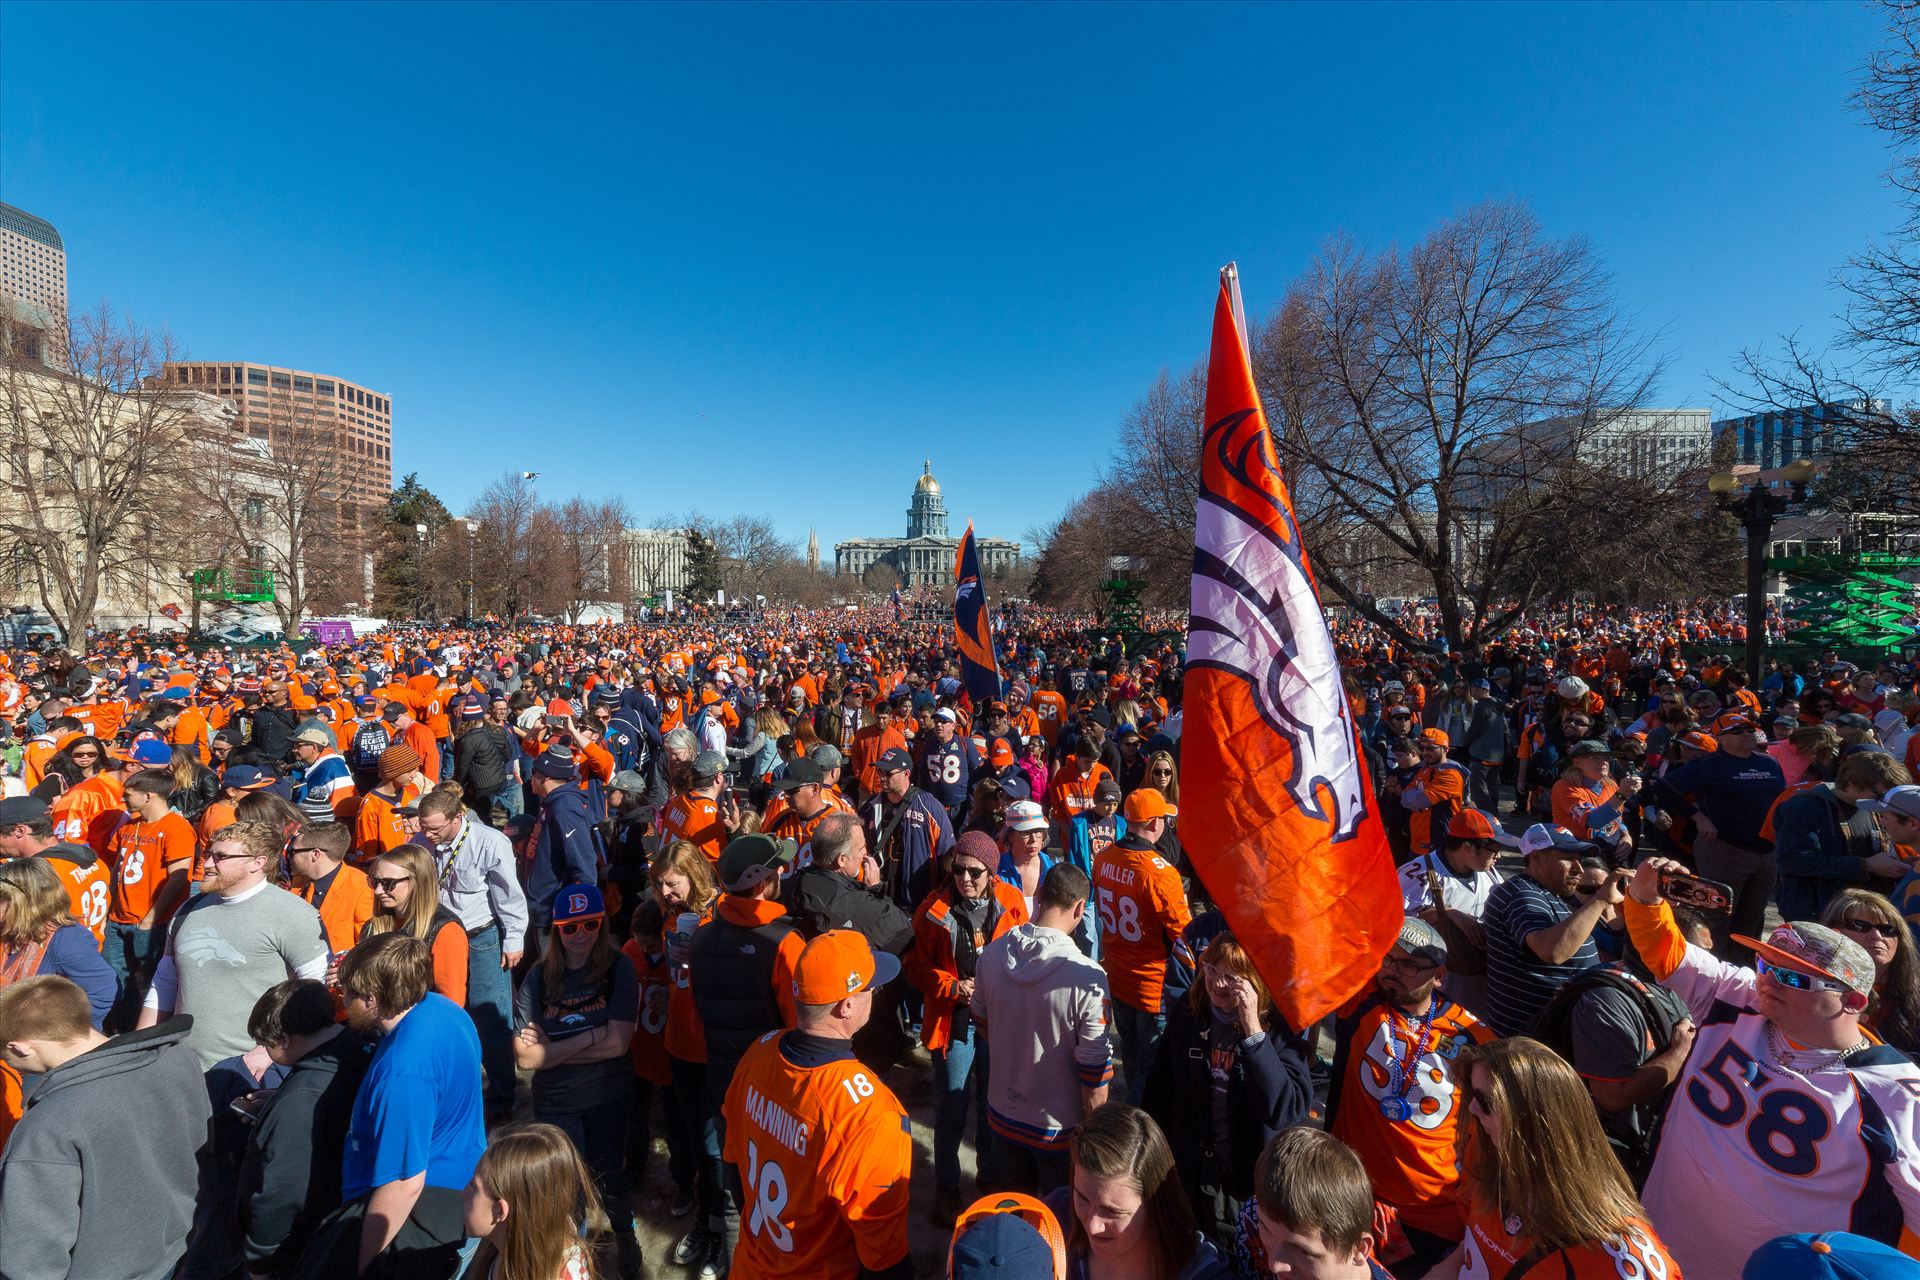 Broncos fans at Civic Park - Fans of the Denver Broncos completely fill Civic Park in Denver Colorado. The state capitol building is visible in the center of the frame. by Scott Smith Photos